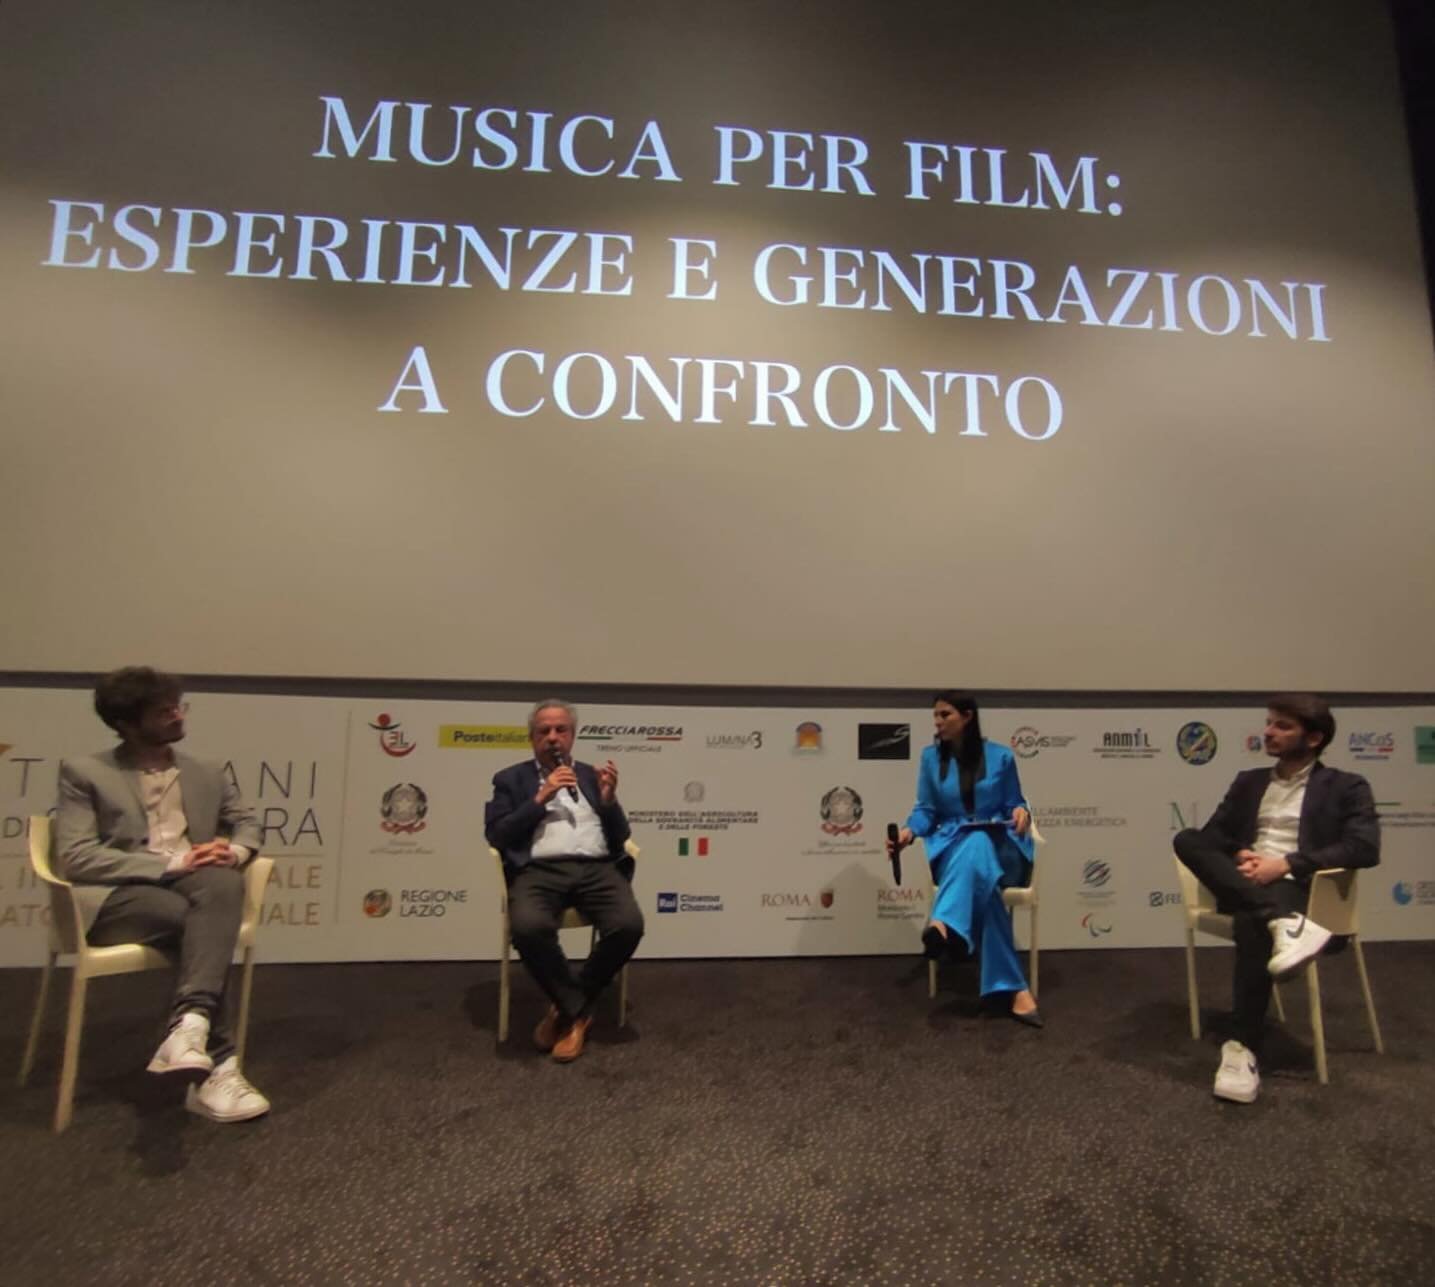 Had a great day in Rome talking about film music with Vince Tempera, @pameladamicoofficial @gianmarco_contini and @emiliano.mazzenga_music 
Thank you @festival_tsn 🎞️